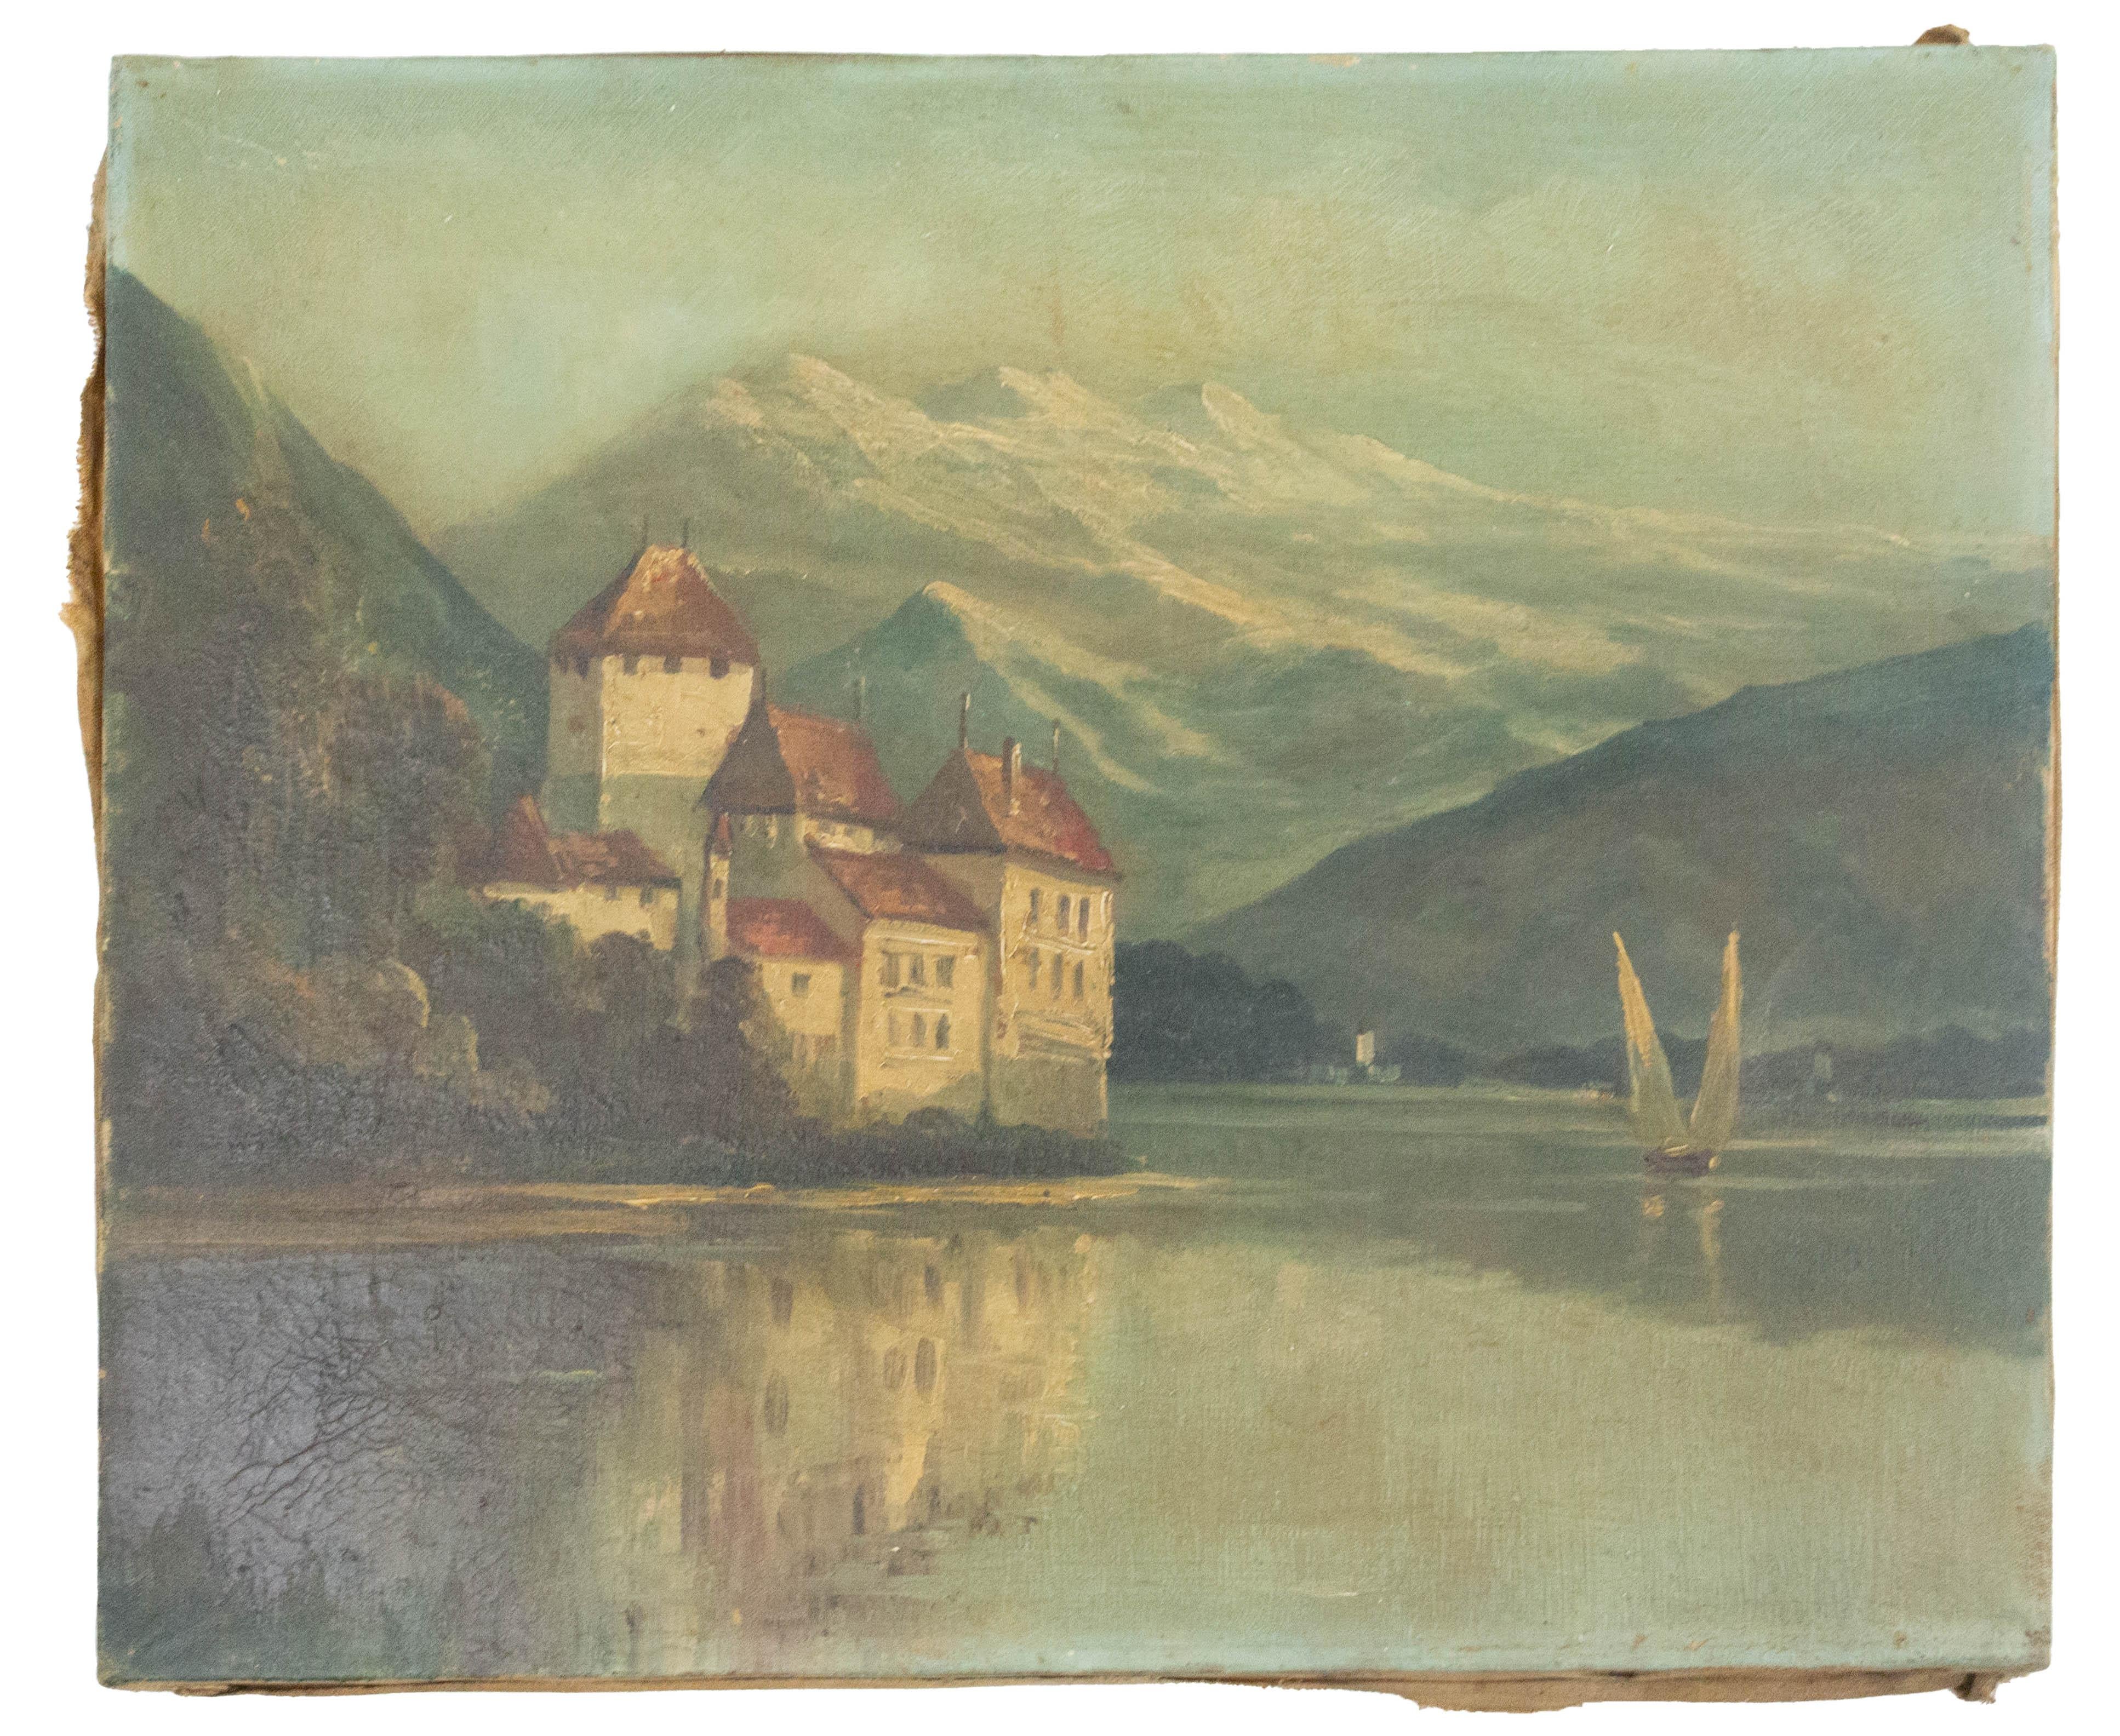 Oil on canvas representing Chateau Chillon at the edge of the Leman Lake
Late 19th century, Switzerland
Good condition

Shipping:
L 45/2/38.
   